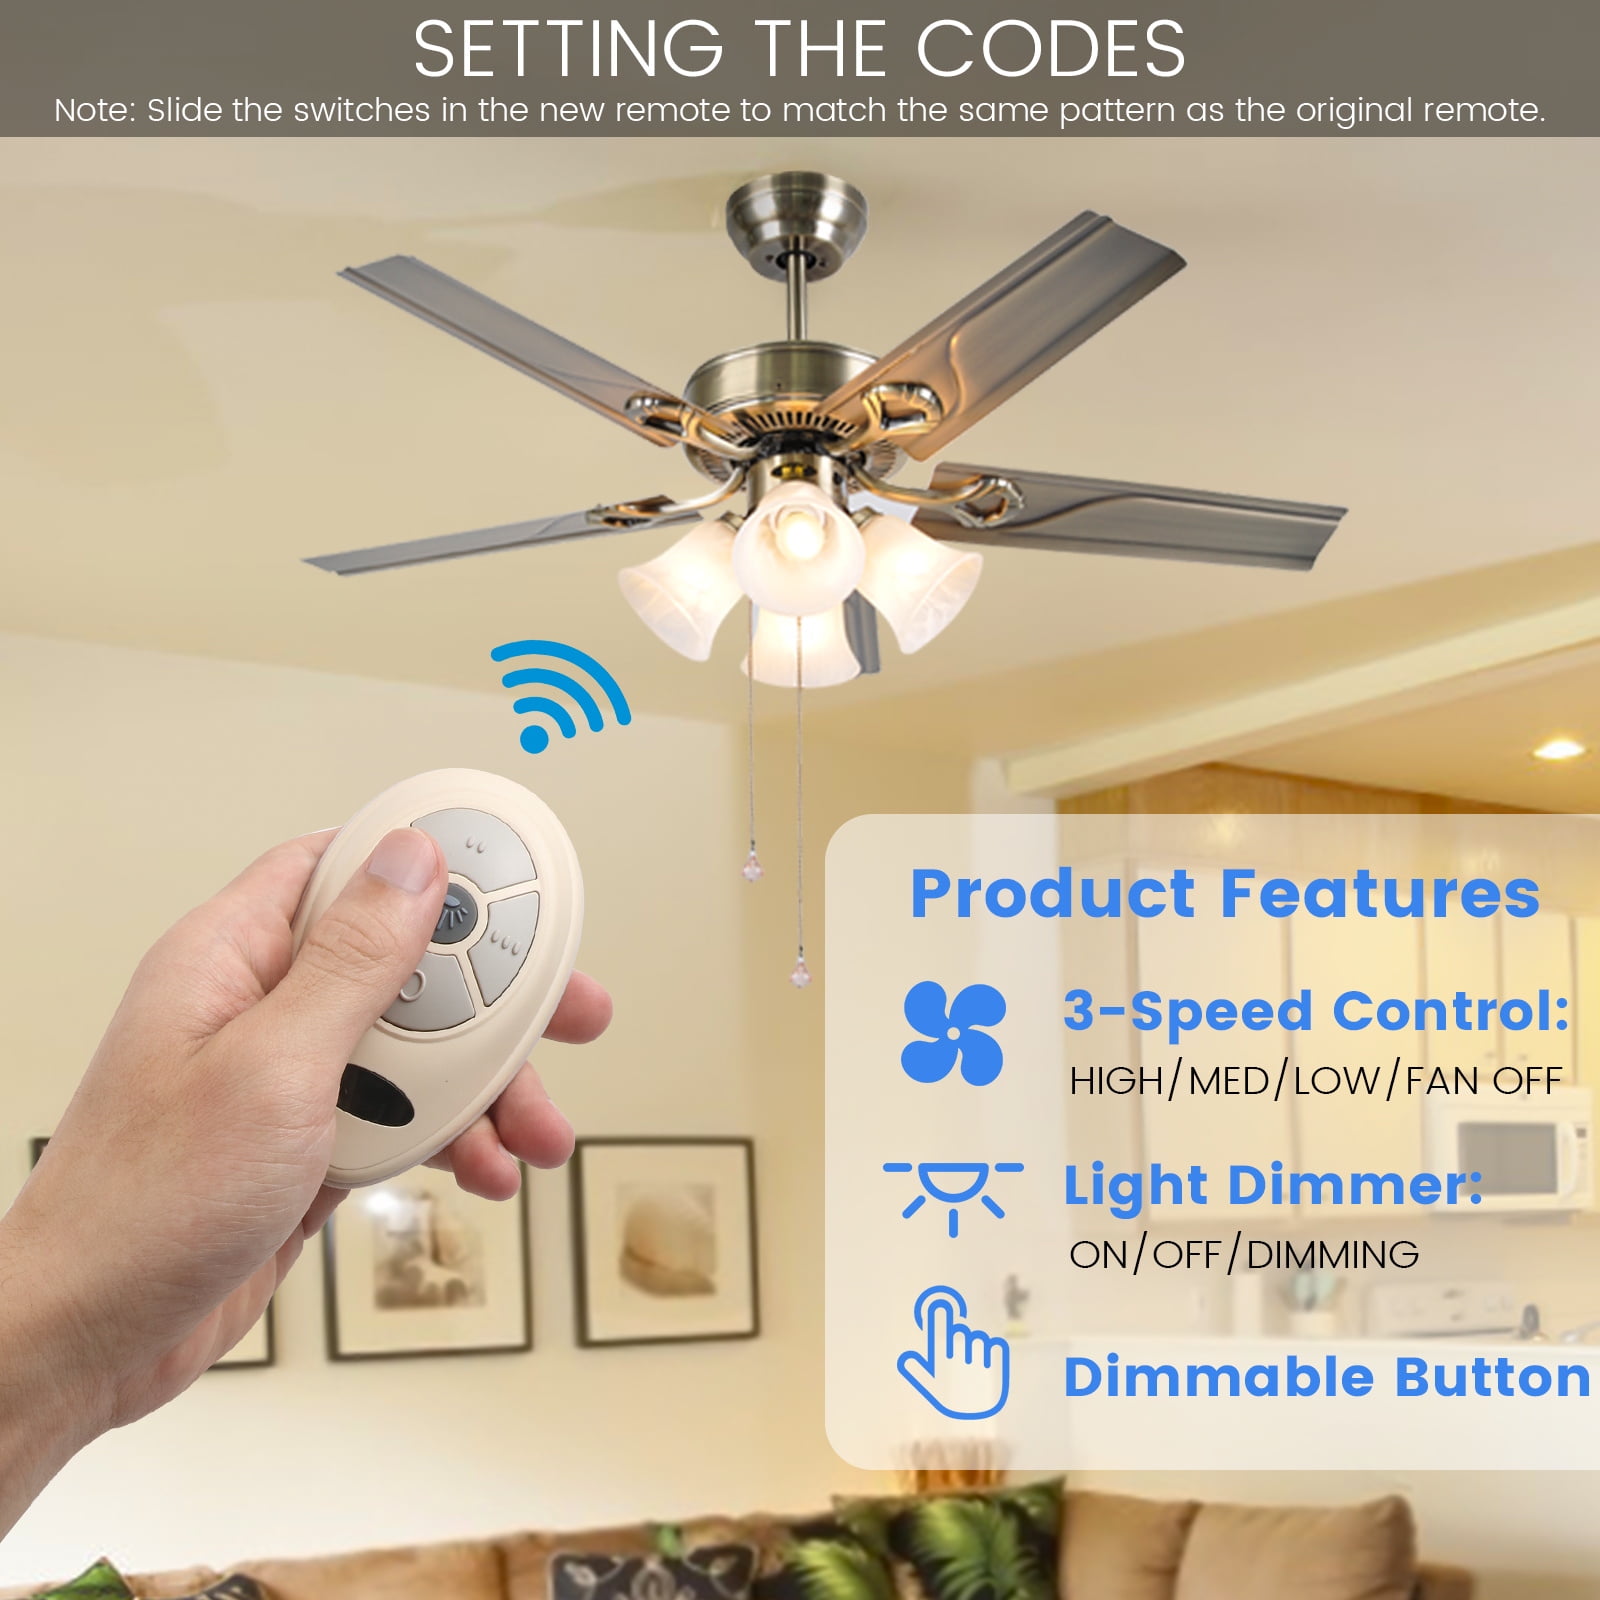 Eogifee 35T Ceiling Fan Remote Control Replacement of Harbor Breeze KUJCE9603 F 